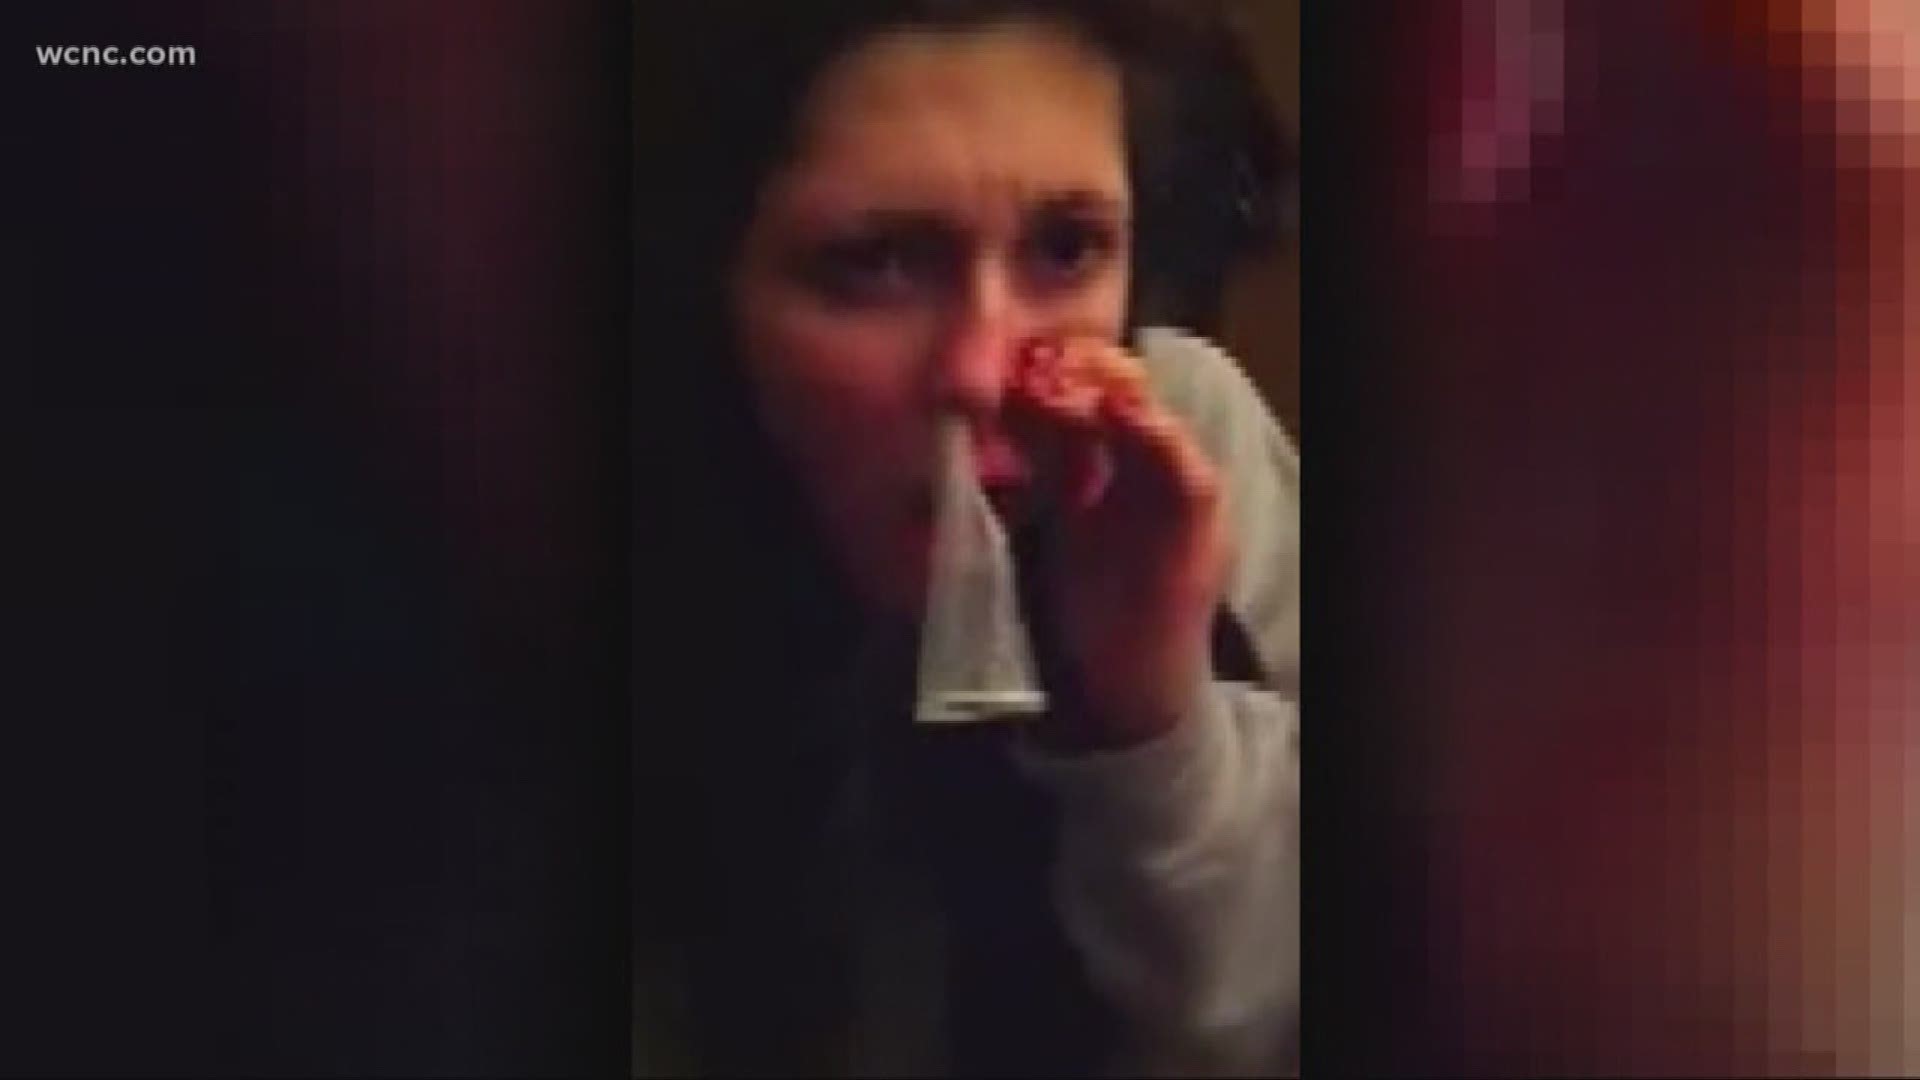 Teens now trying to snort condoms